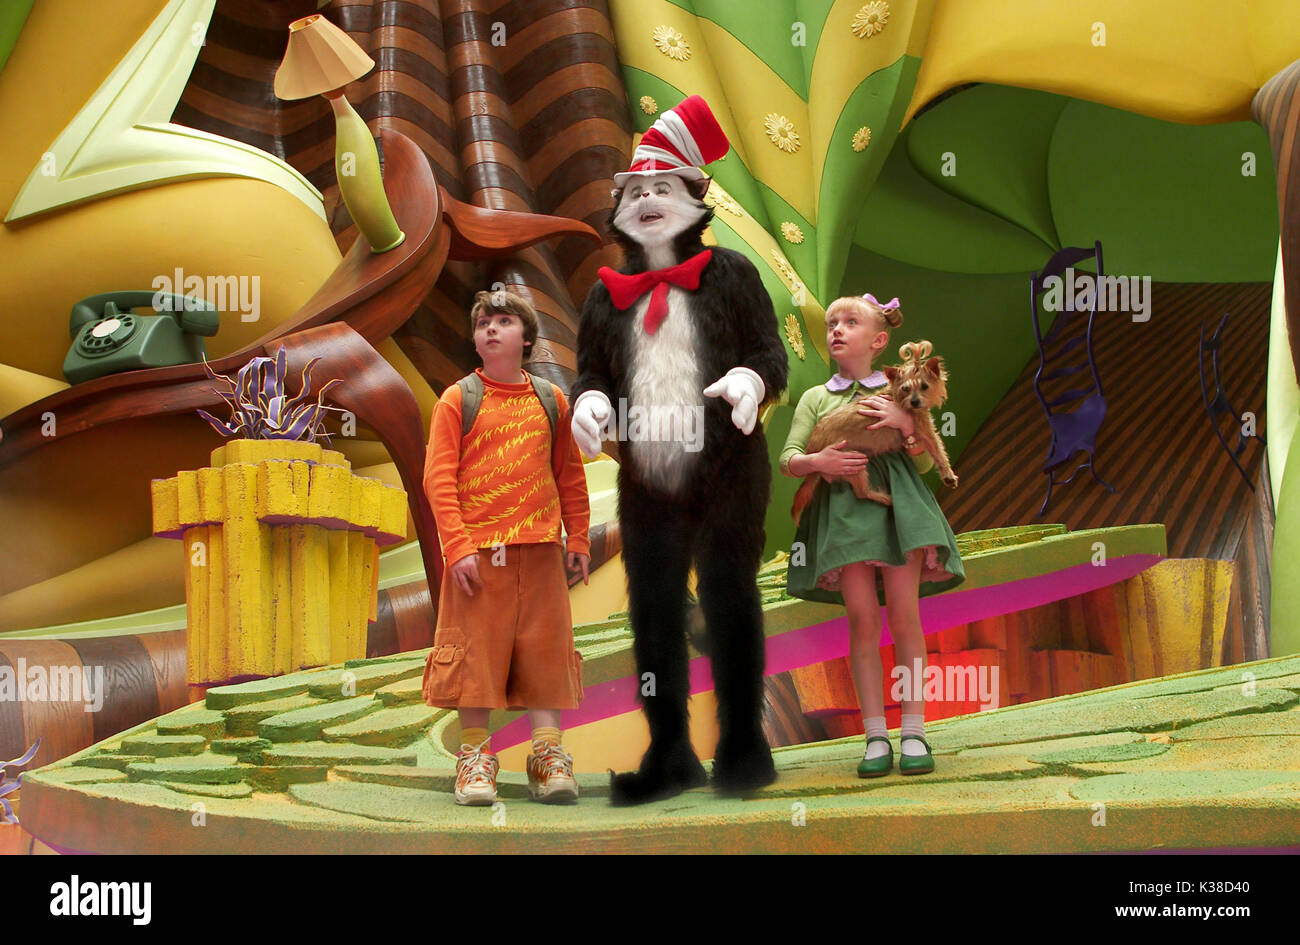 THE CAT IN THE HAT MIKE MYERS as the Cat with SPENCER BRESLIN and DAKOTA FANNING (Sally)     Date: 2003 Stock Photo